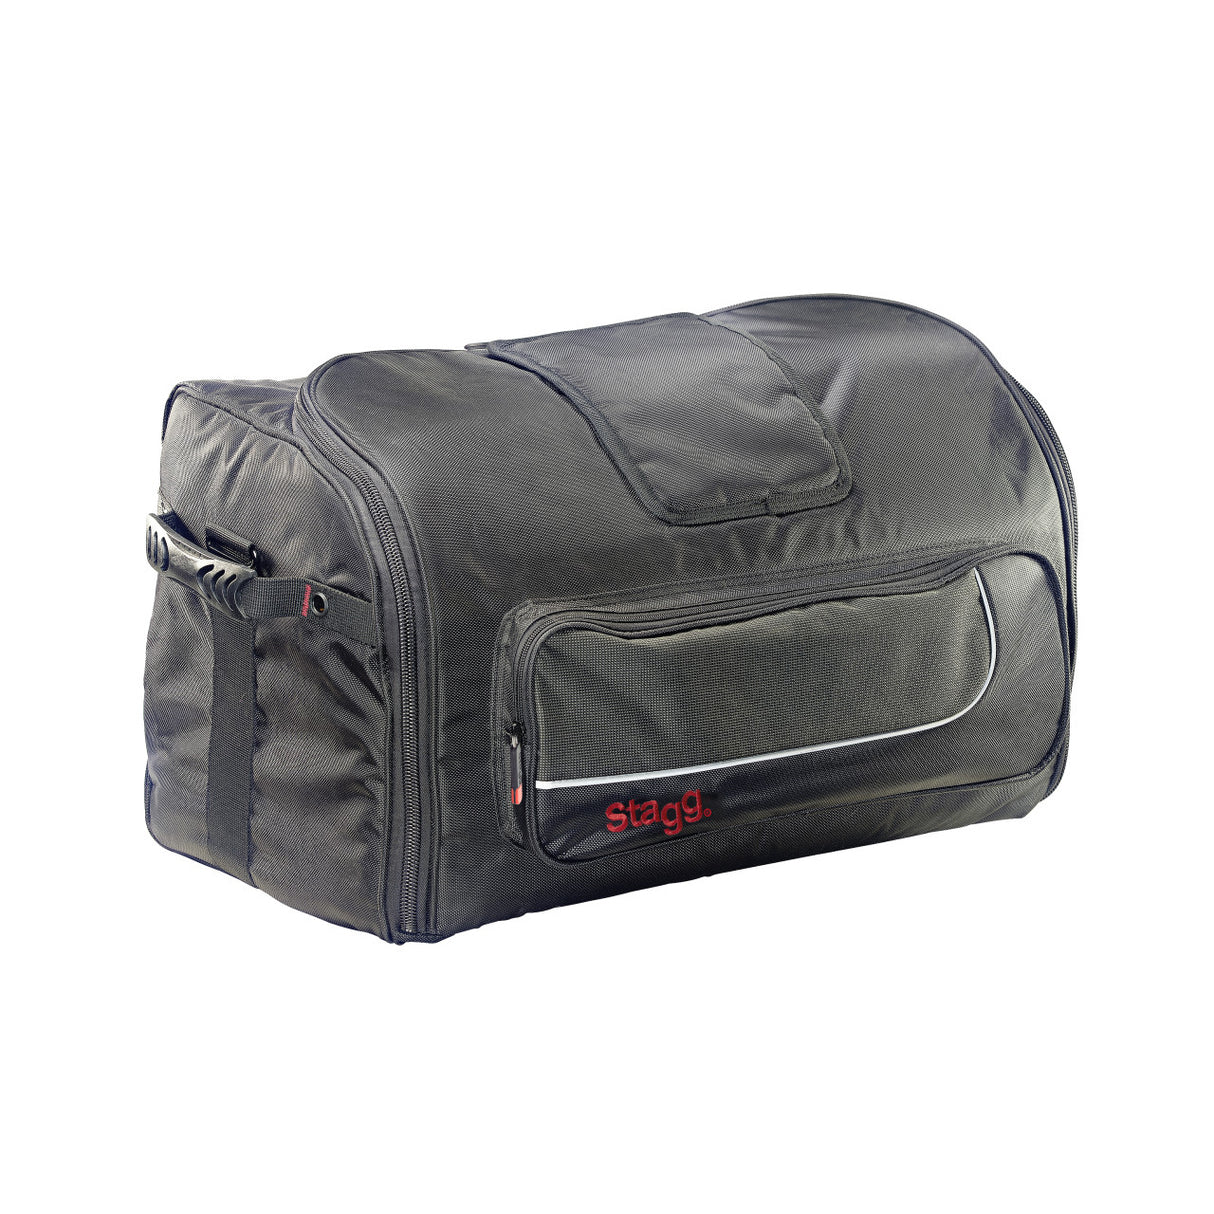 Stagg Padded Carry Bag for 10" PA Speakers